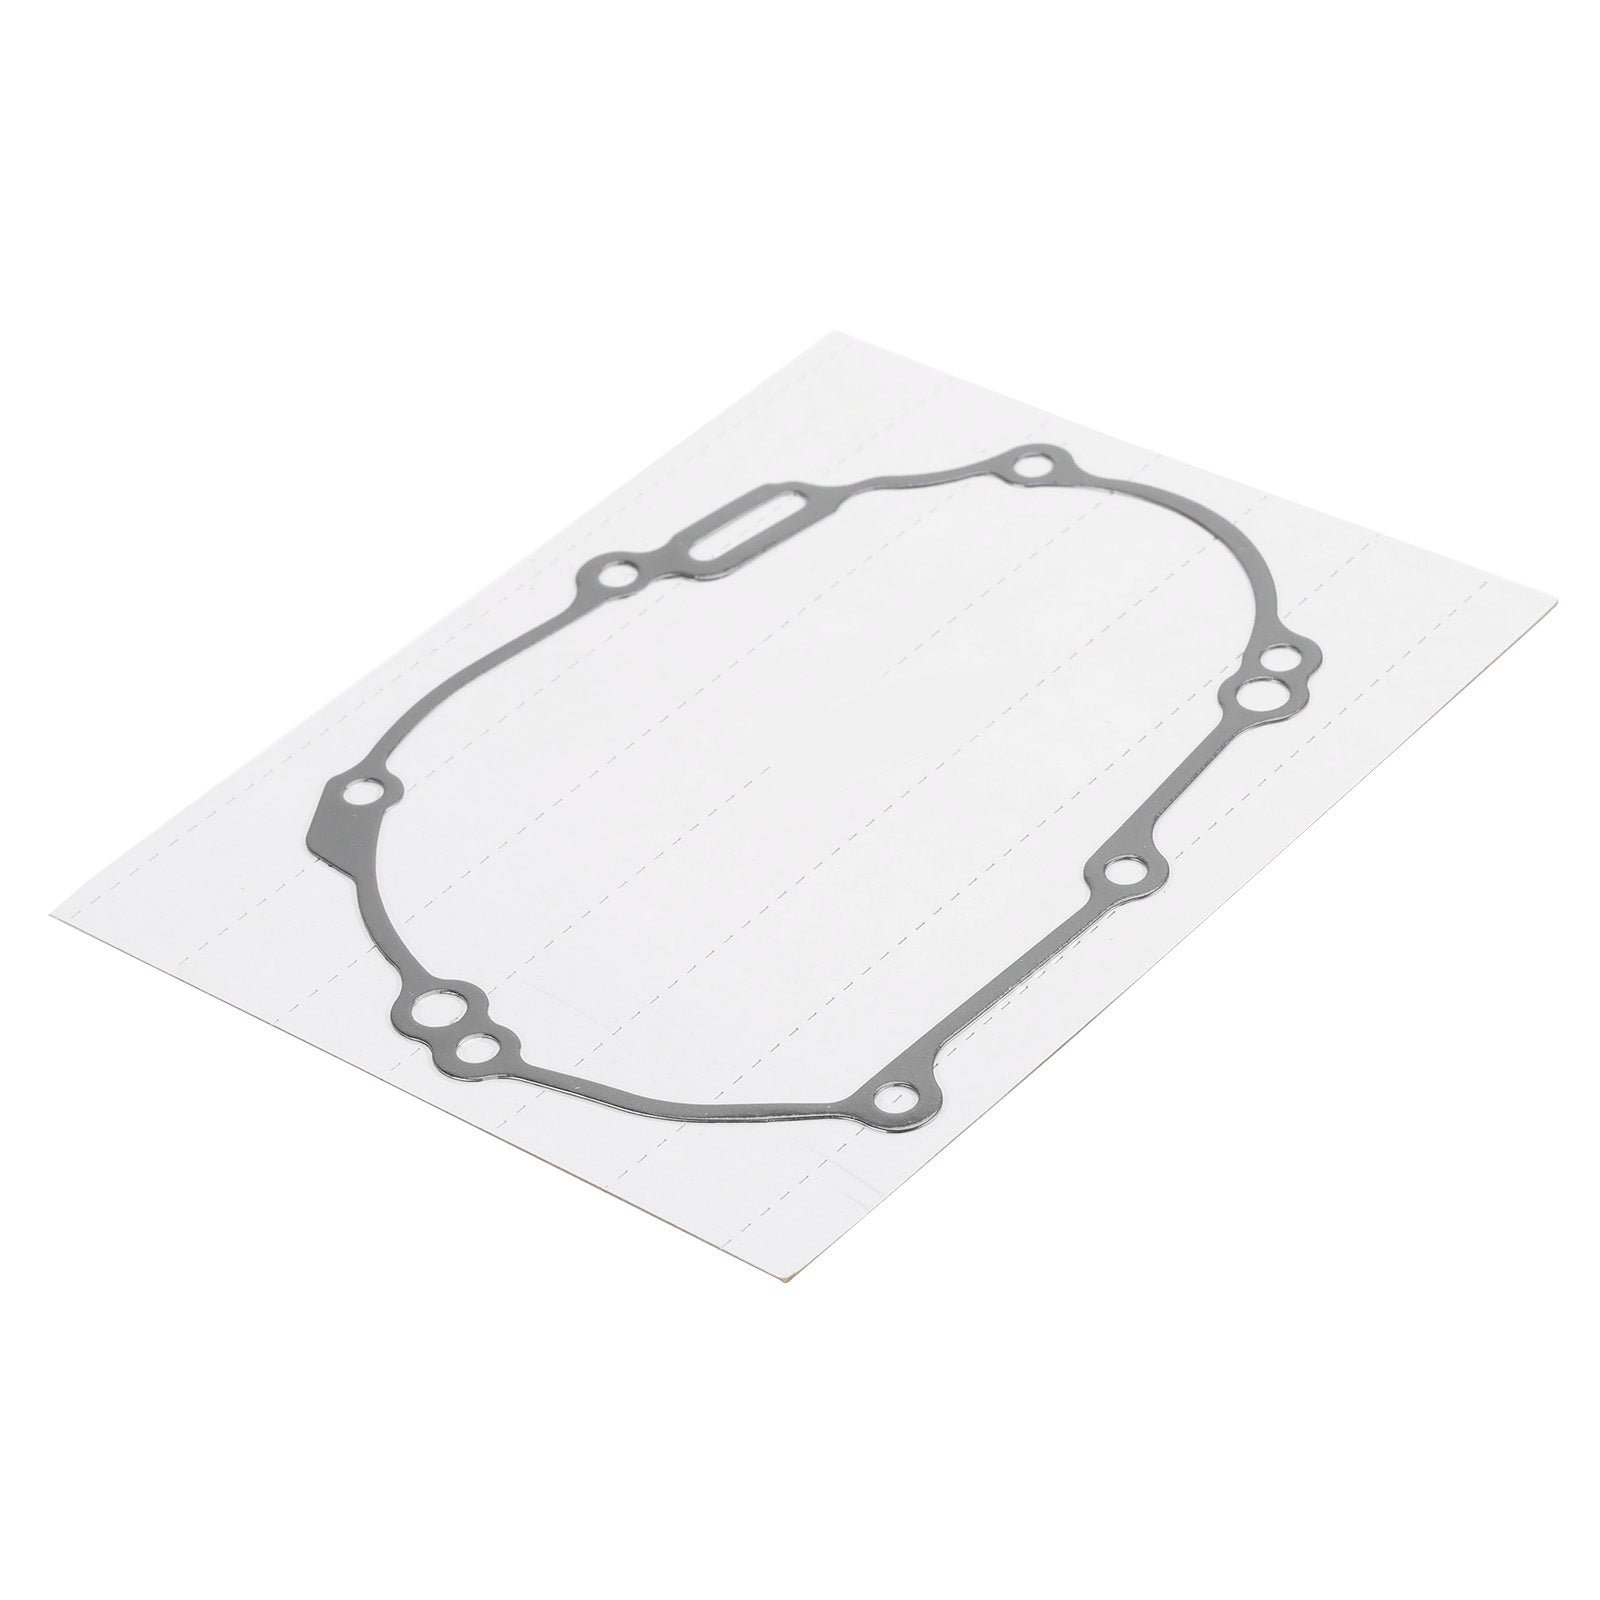 19-23 Yamaha YZF450 YZ 450 F FX / WR 450 F Left Ignition Cover Gasket